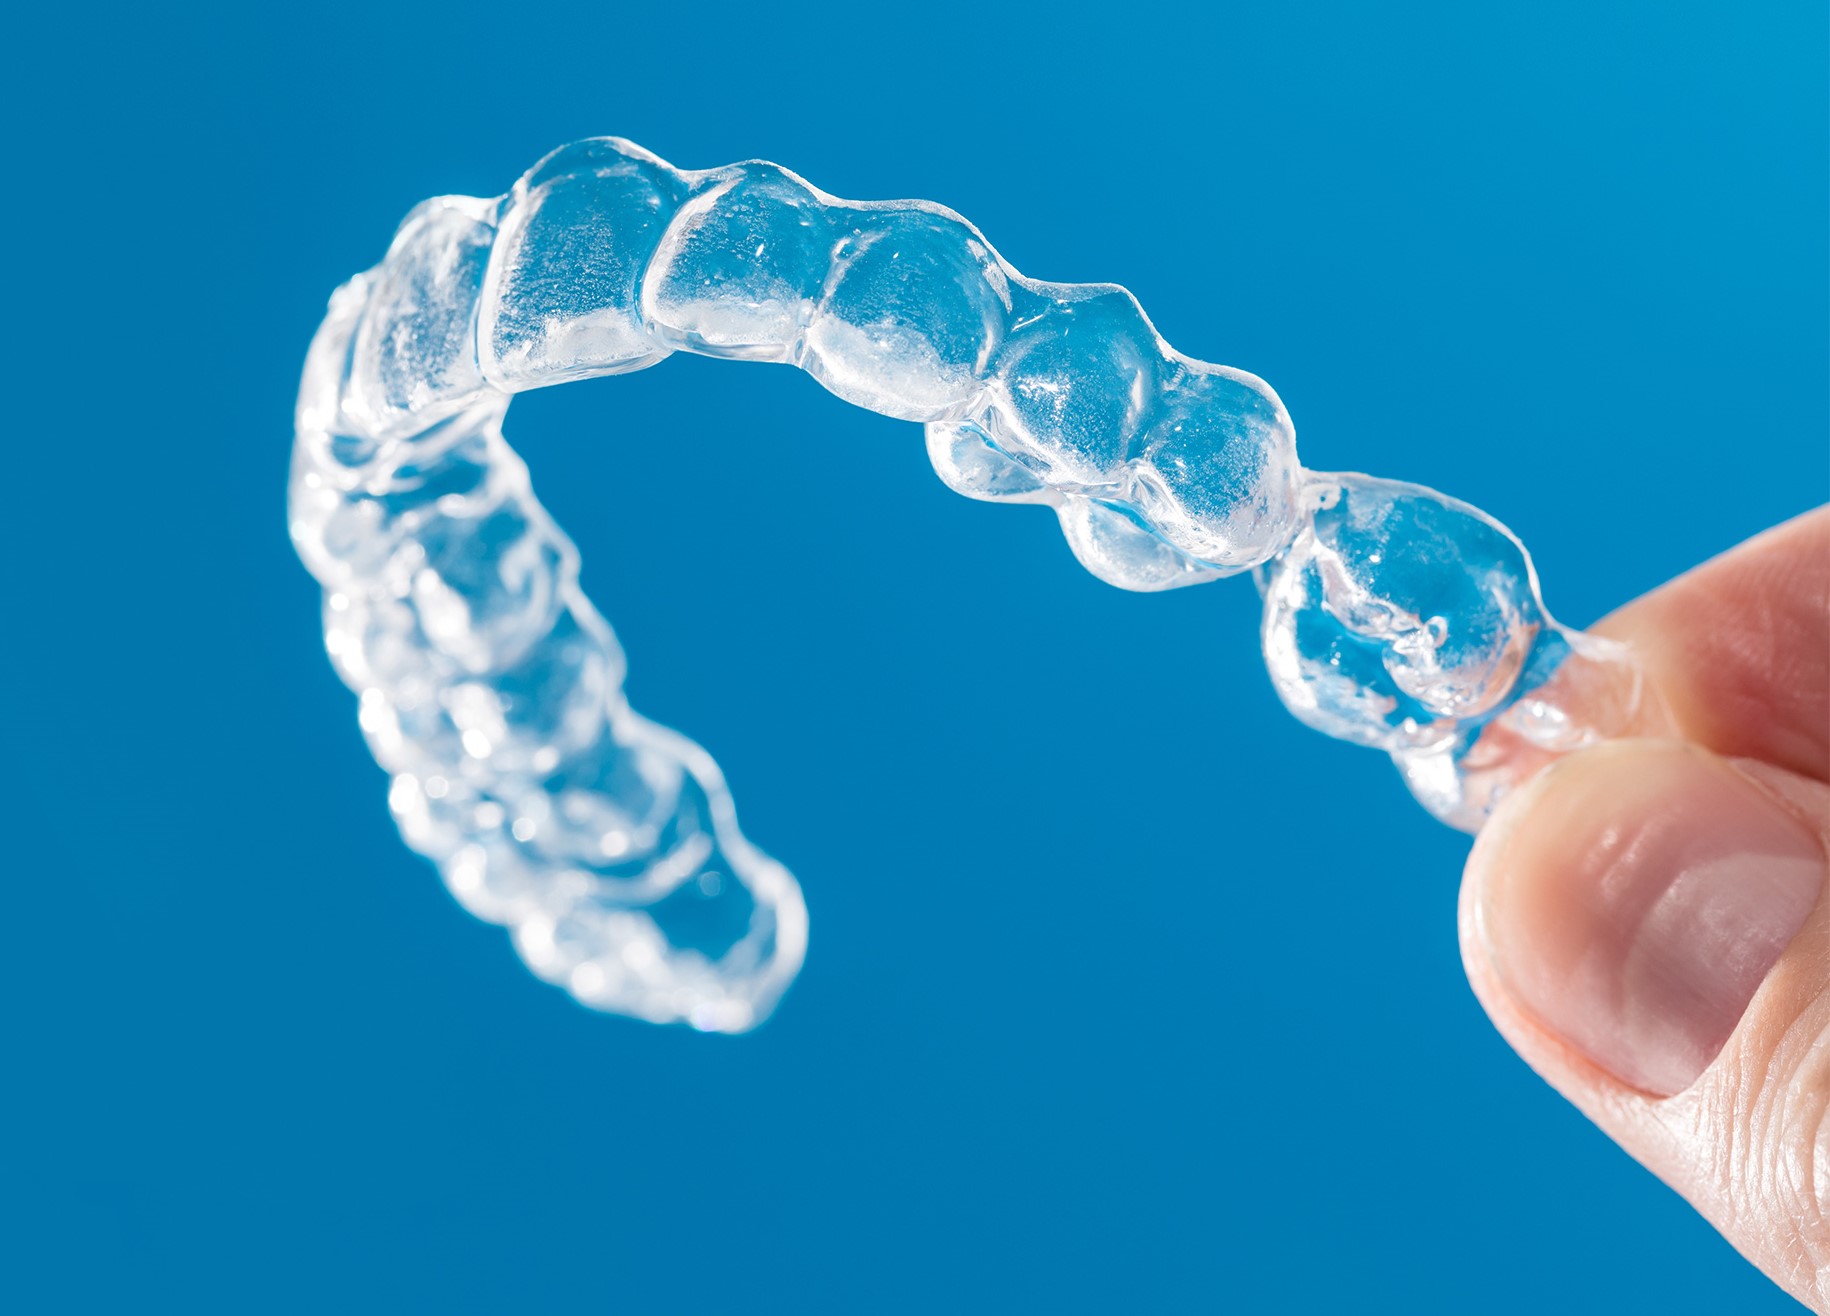 Choosing Clear Aligners for Your Treatment